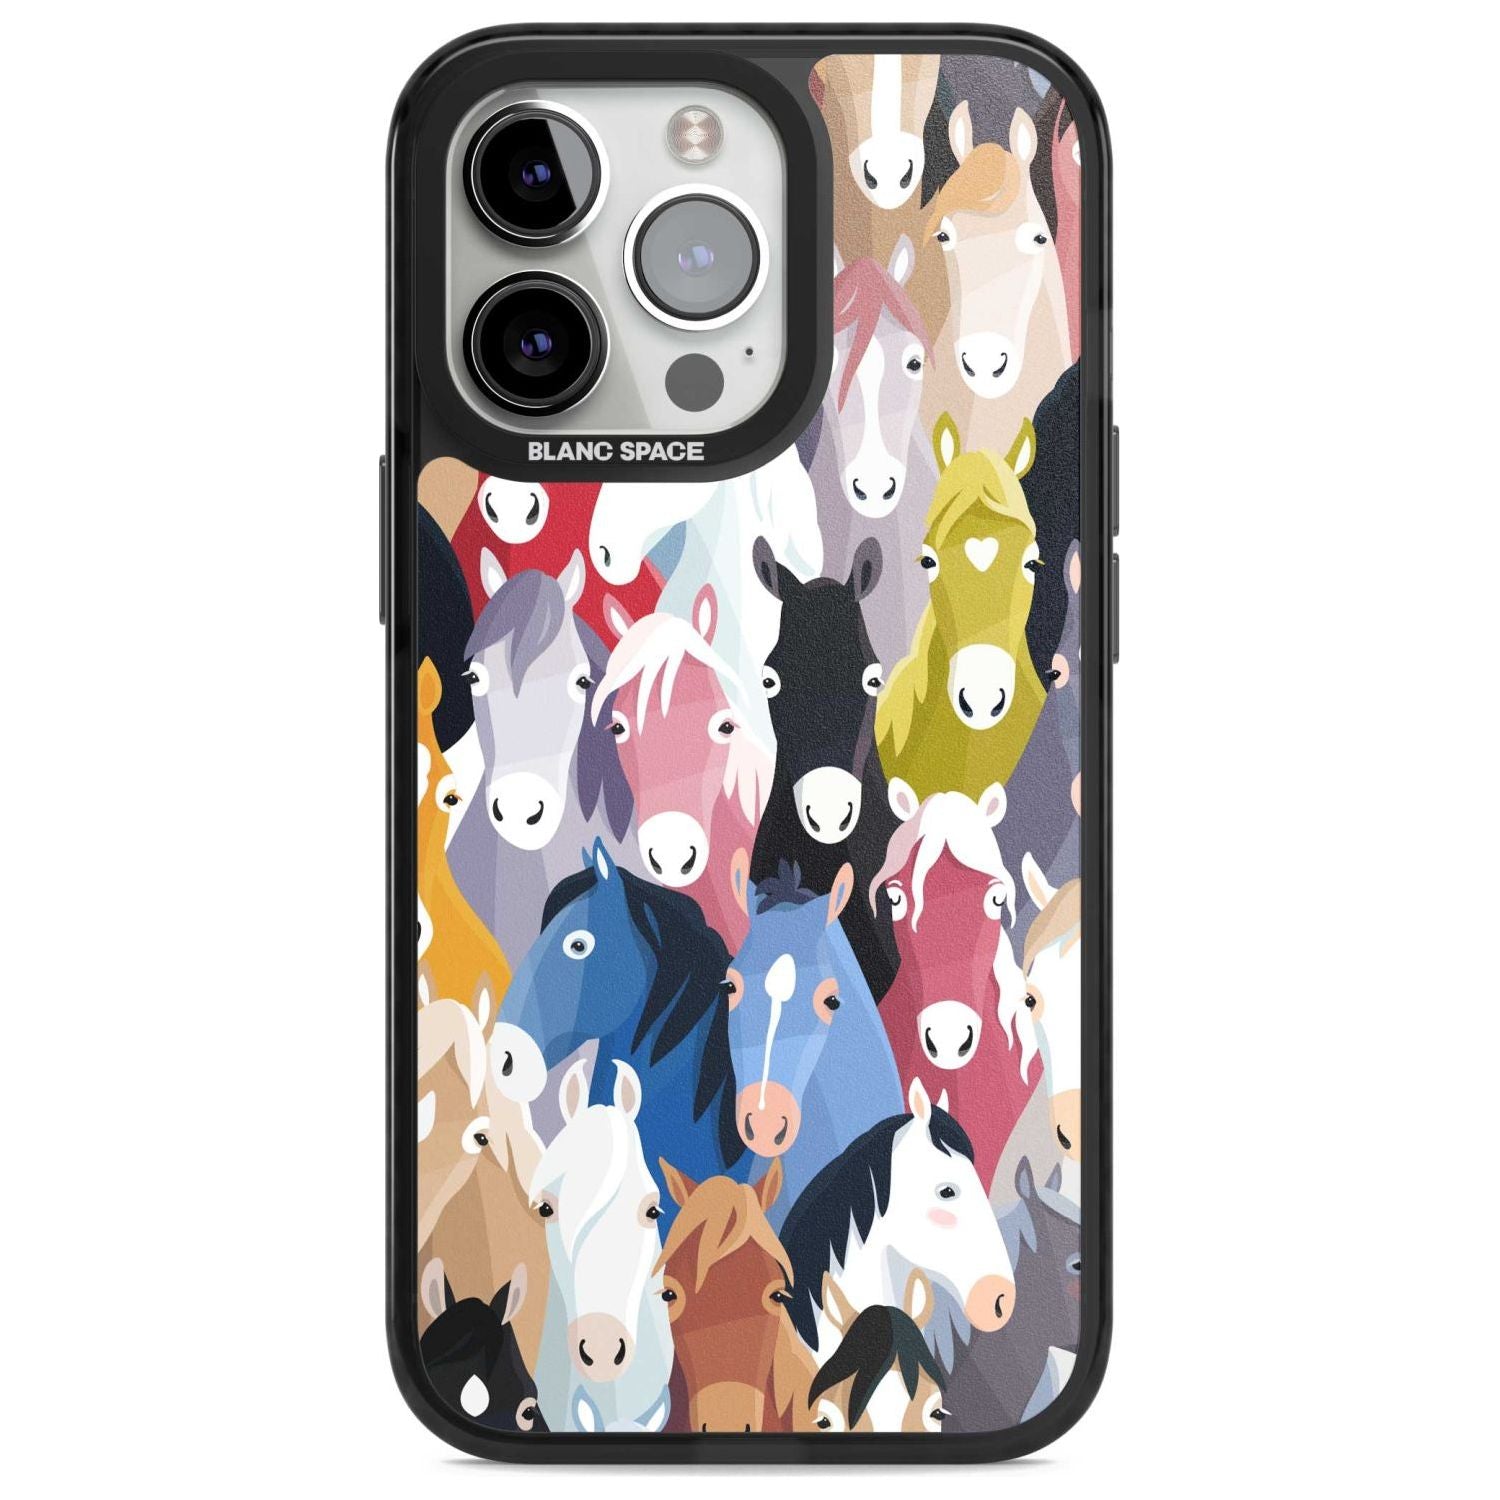 Colourful Horse Pattern Phone Case iPhone 15 Pro Max / Magsafe Black Impact Case,iPhone 15 Pro / Magsafe Black Impact Case,iPhone 14 Pro Max / Magsafe Black Impact Case,iPhone 14 Pro / Magsafe Black Impact Case,iPhone 13 Pro / Magsafe Black Impact Case Blanc Space